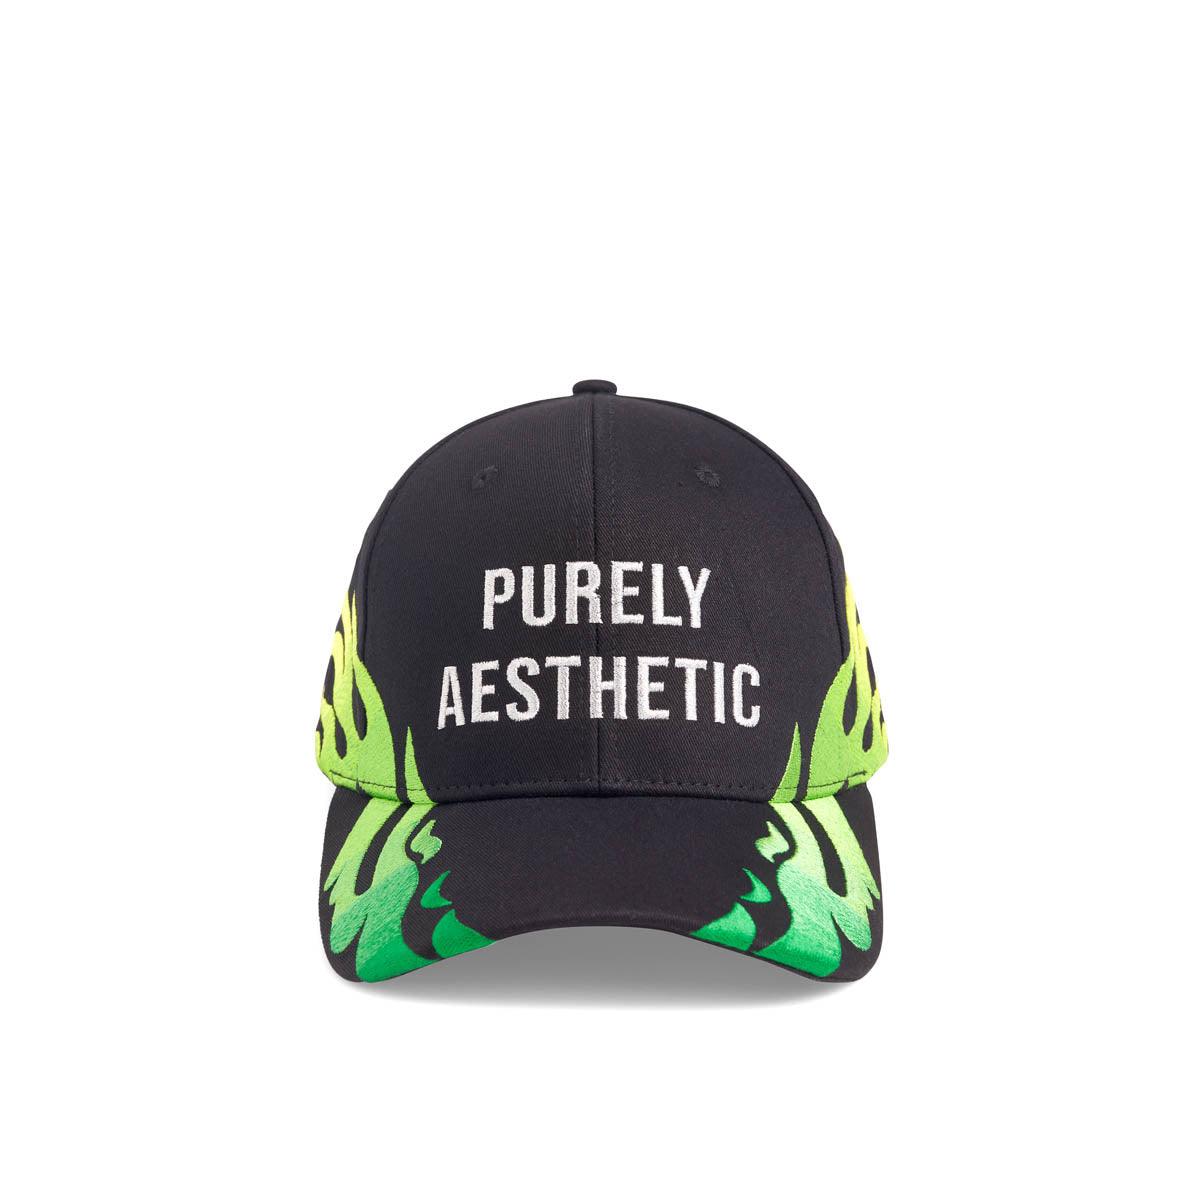 PURELY AESTHETIC HAT - Strike Oil